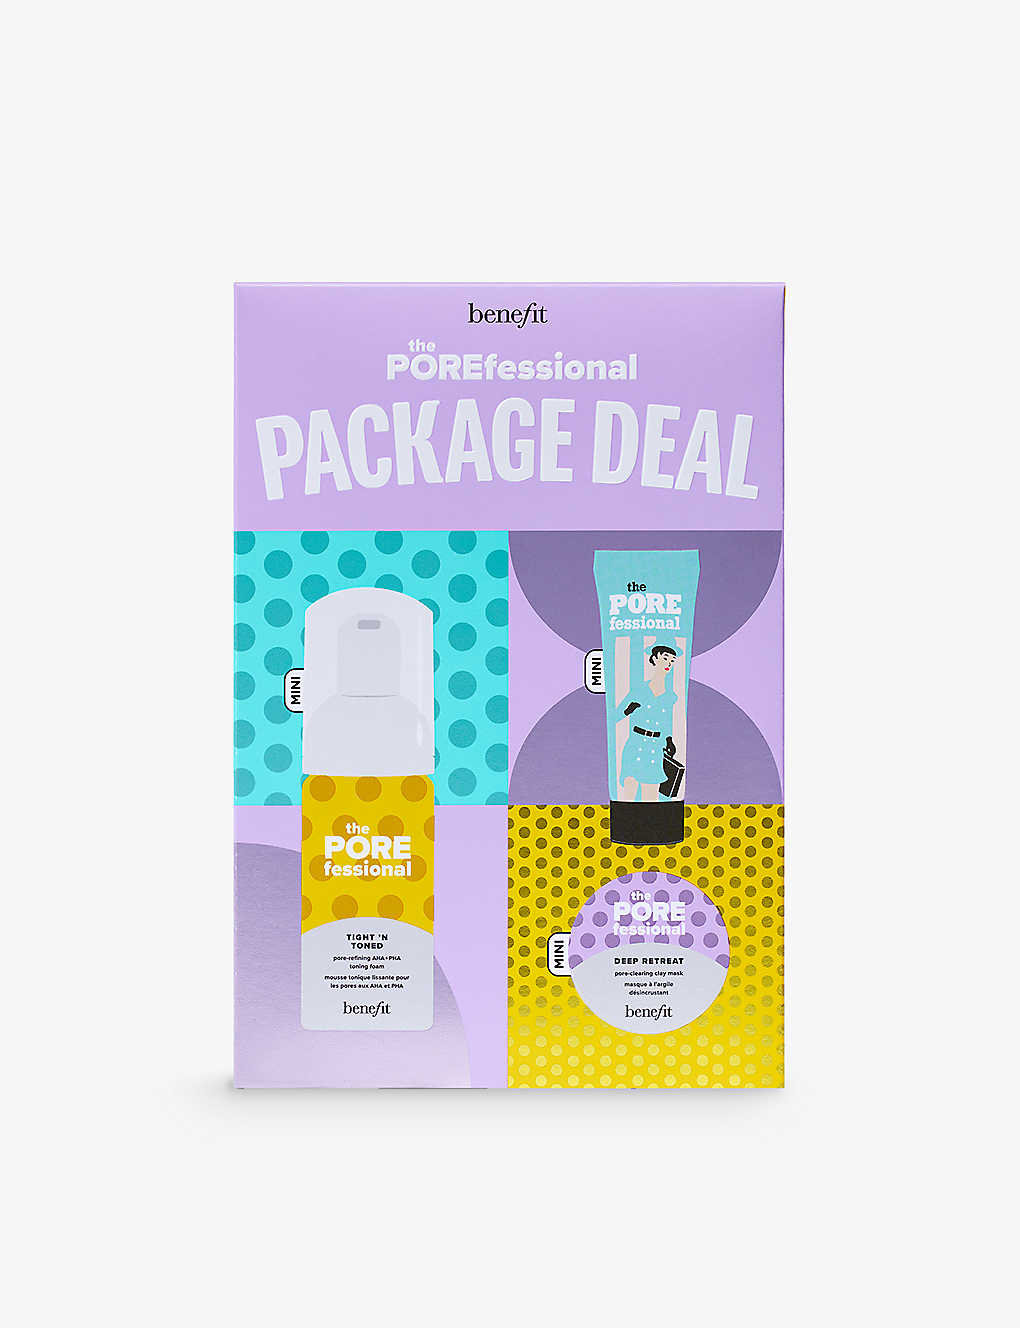 Benefit The Porefessional Package Deal Gift Set